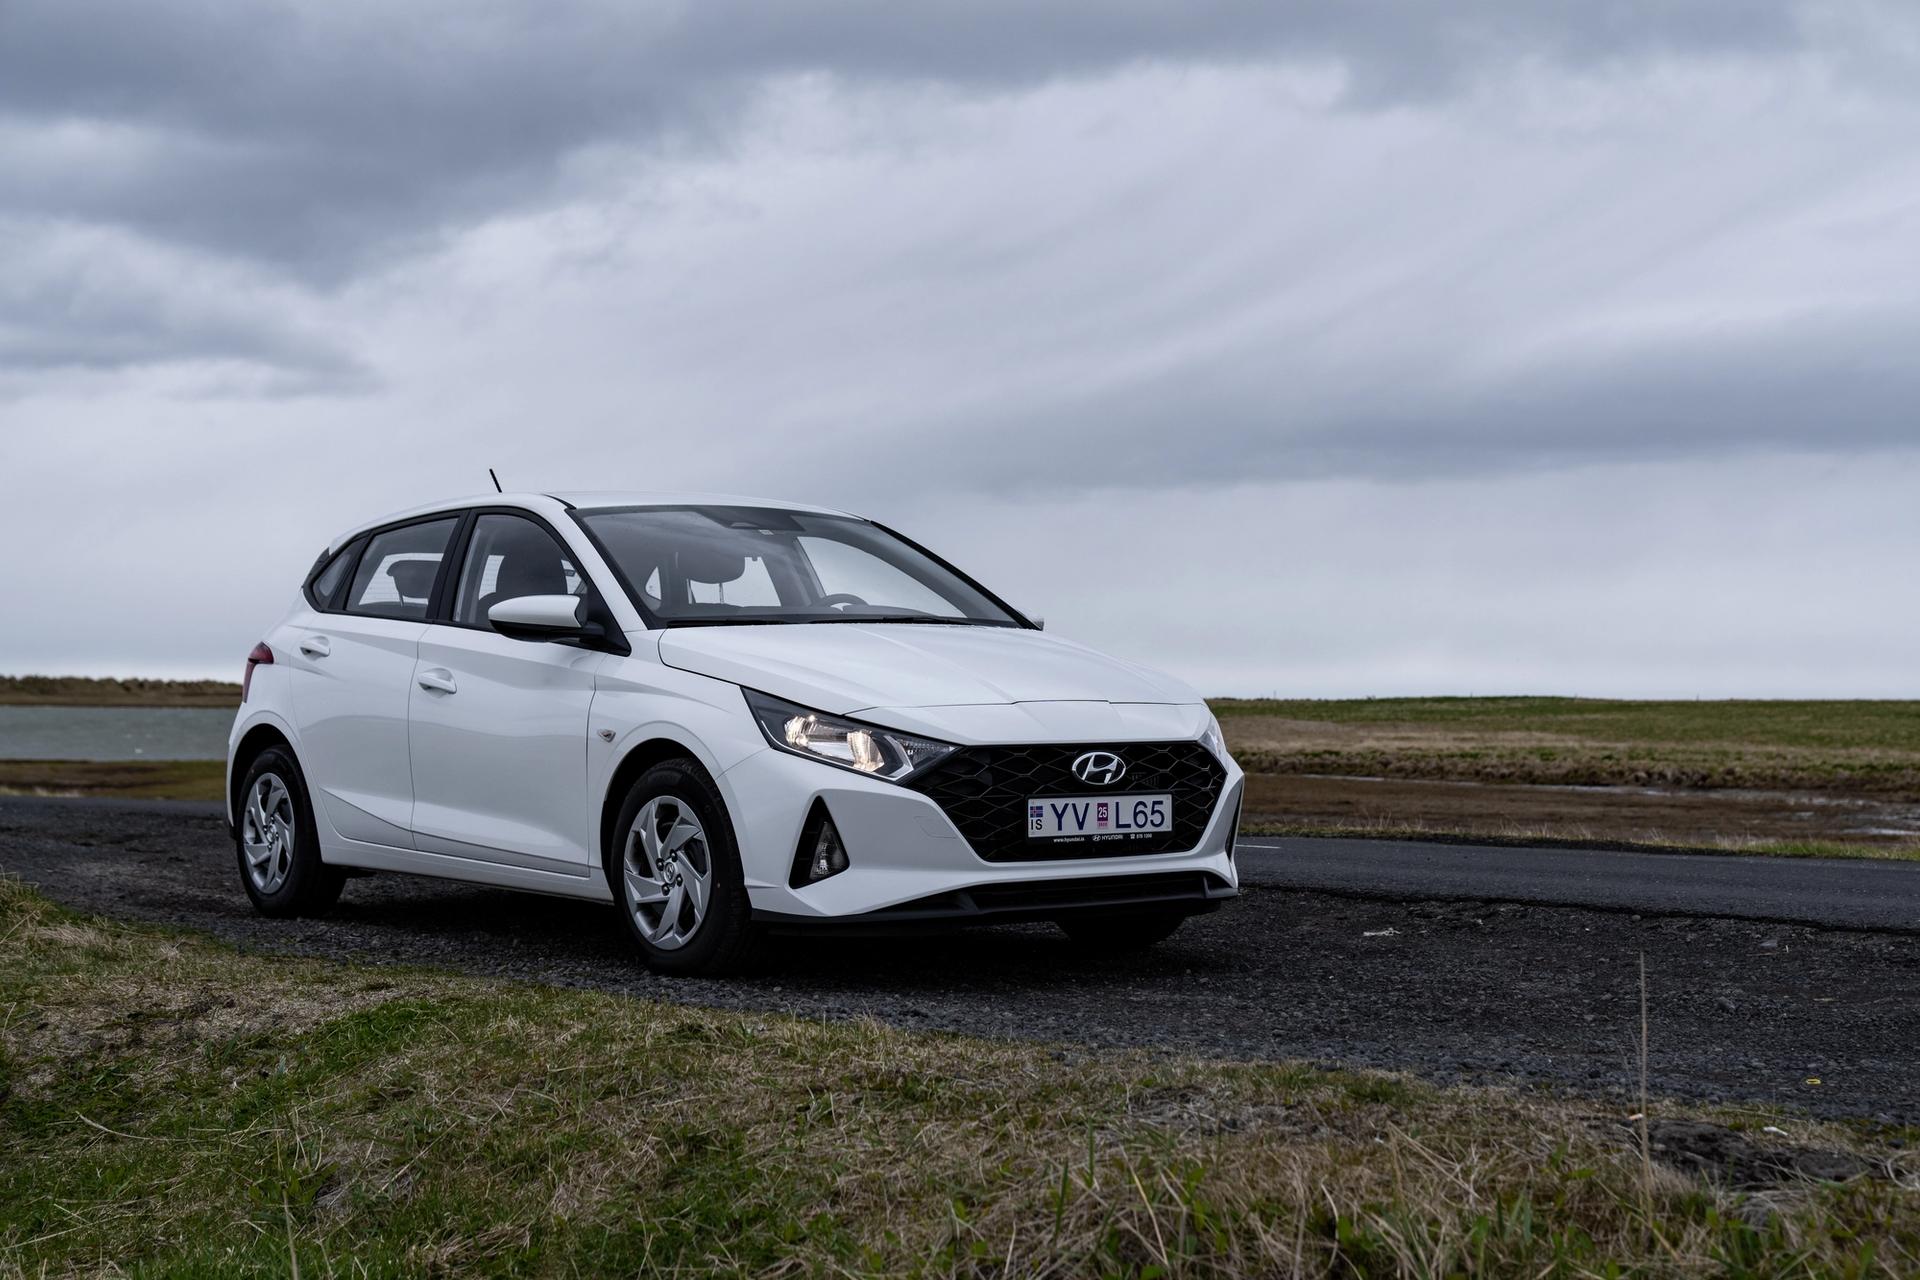 A sleek Hyundai i20, a great option for car rental in Iceland, parked against a beautiful Icelandic landscape.